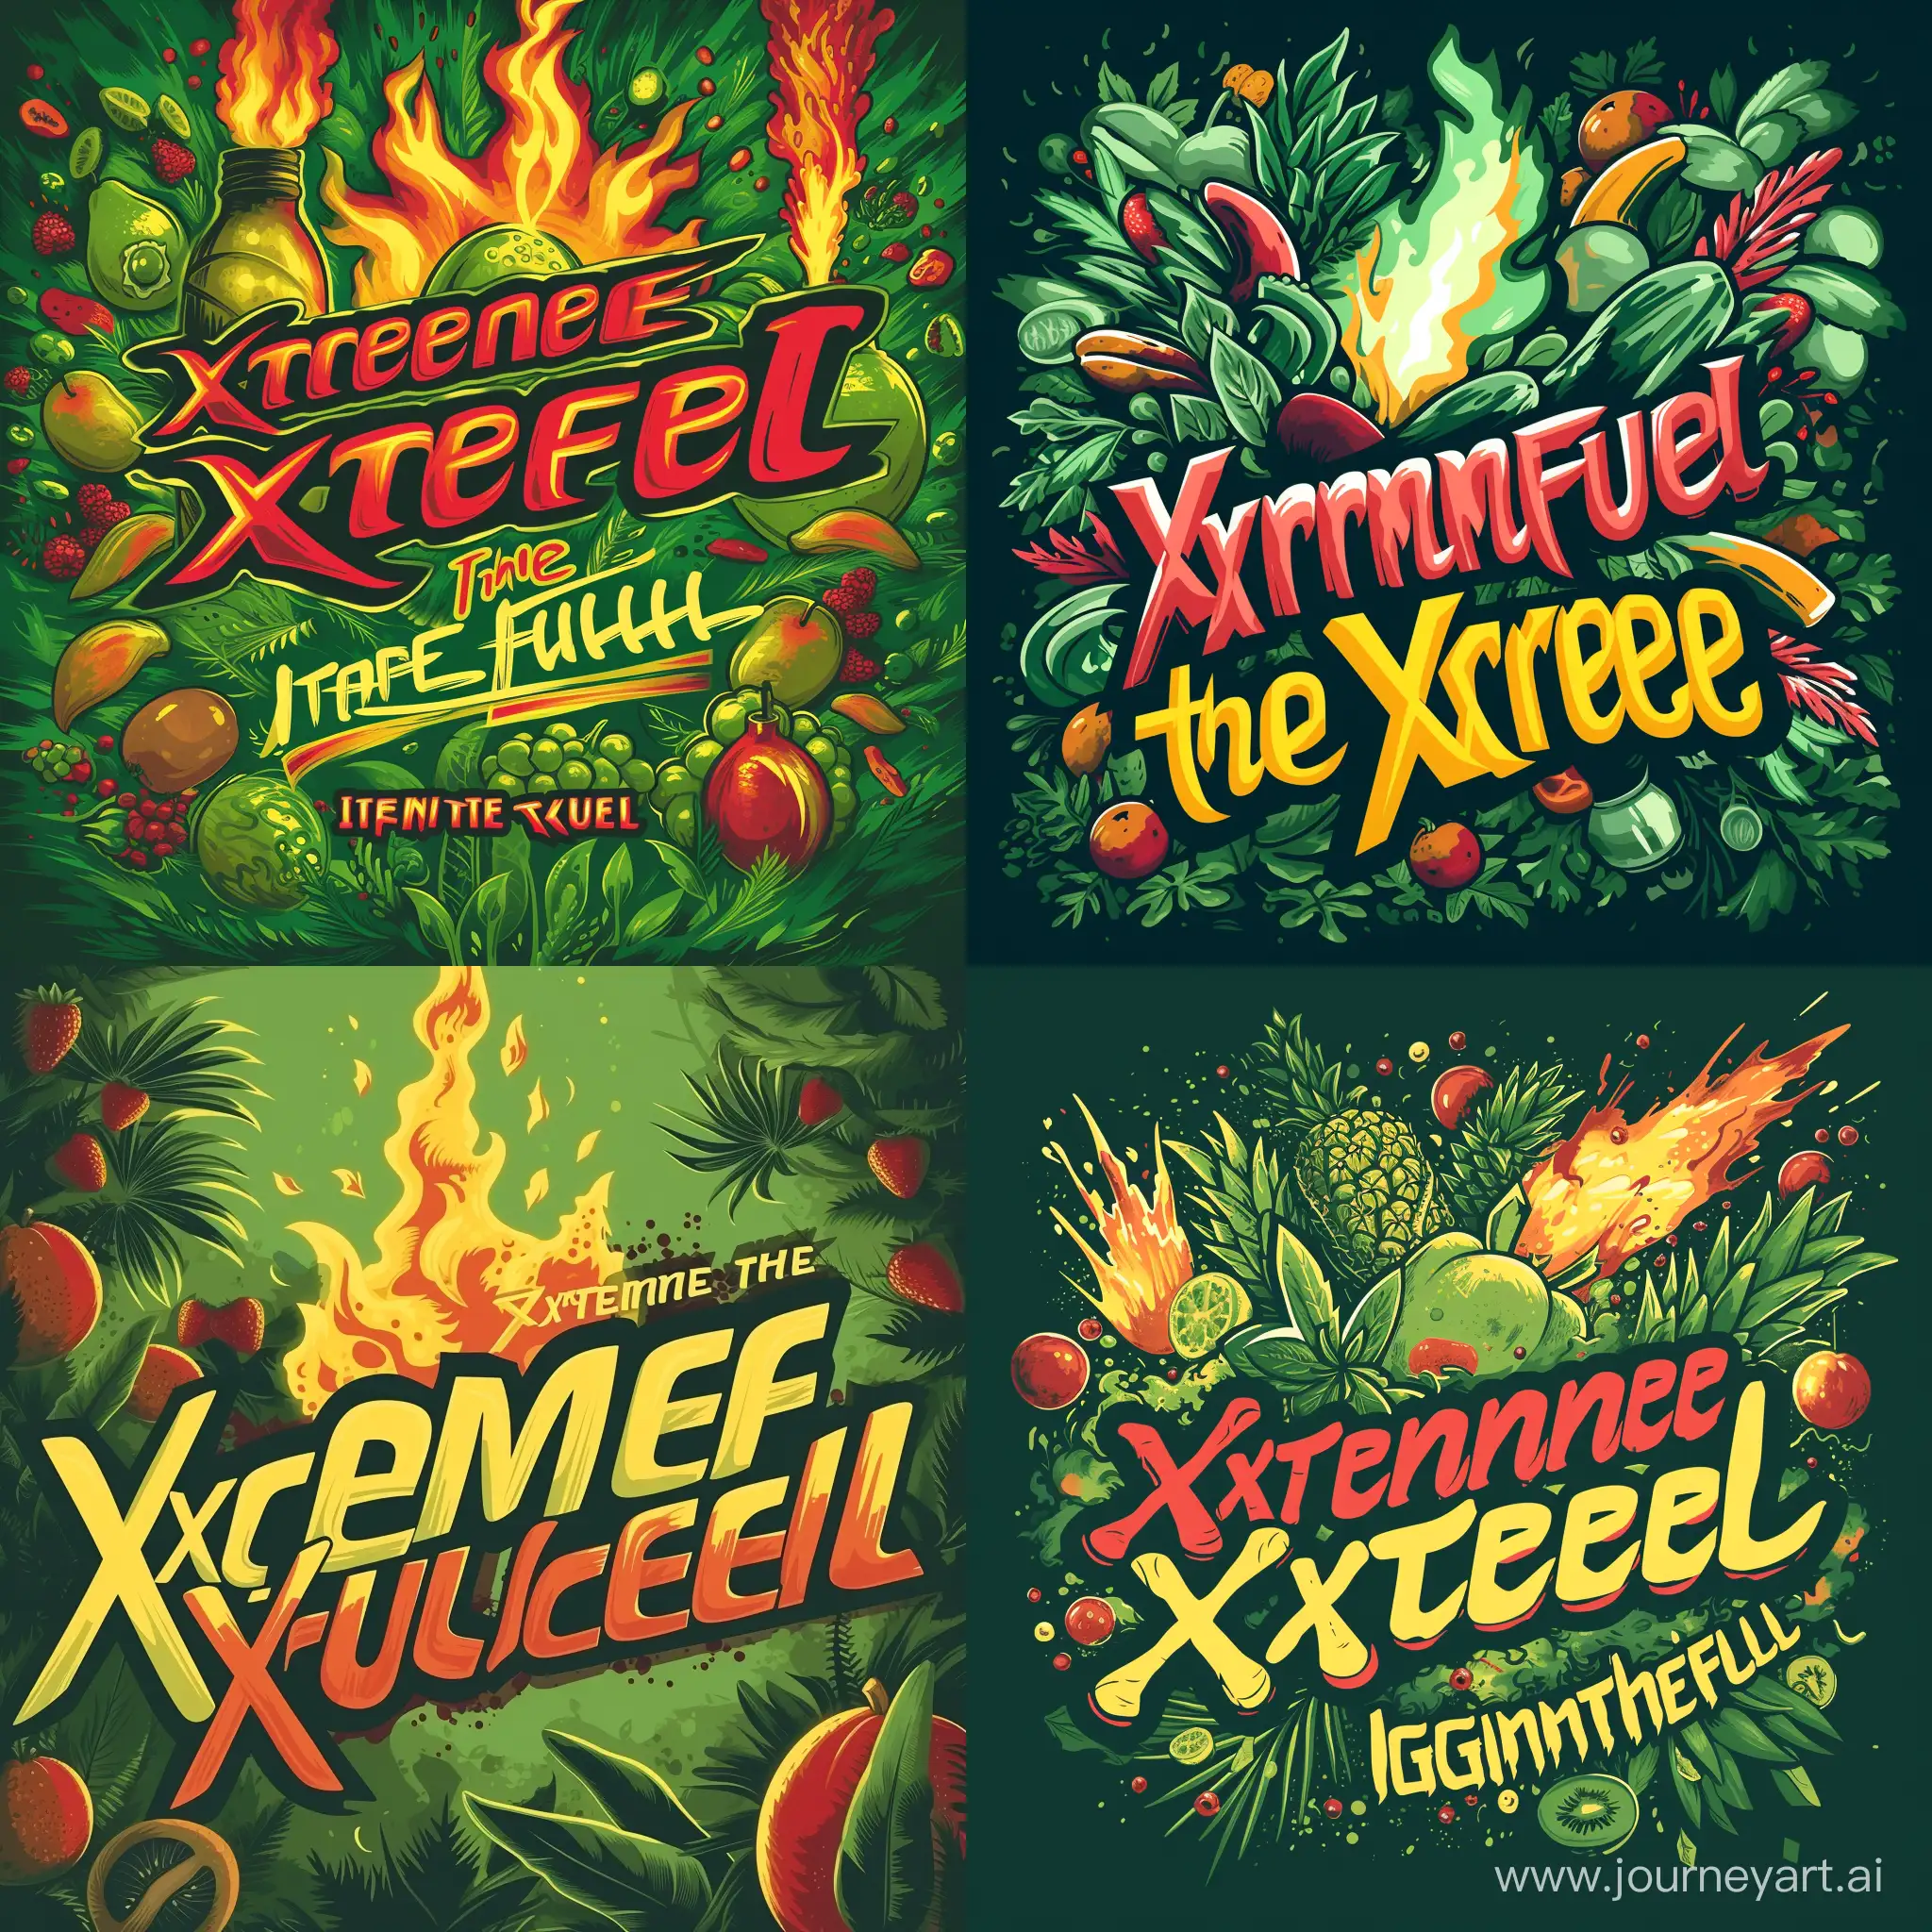 A logo dor a energydrink whit the name XtremeFuel with a slogan Ignite the Xtreme. XtremeFuel is adveturos and healthy. Green and fruity and earthy backgrond whit som energetic red and yellow in the text. . With fruity and earthy background.